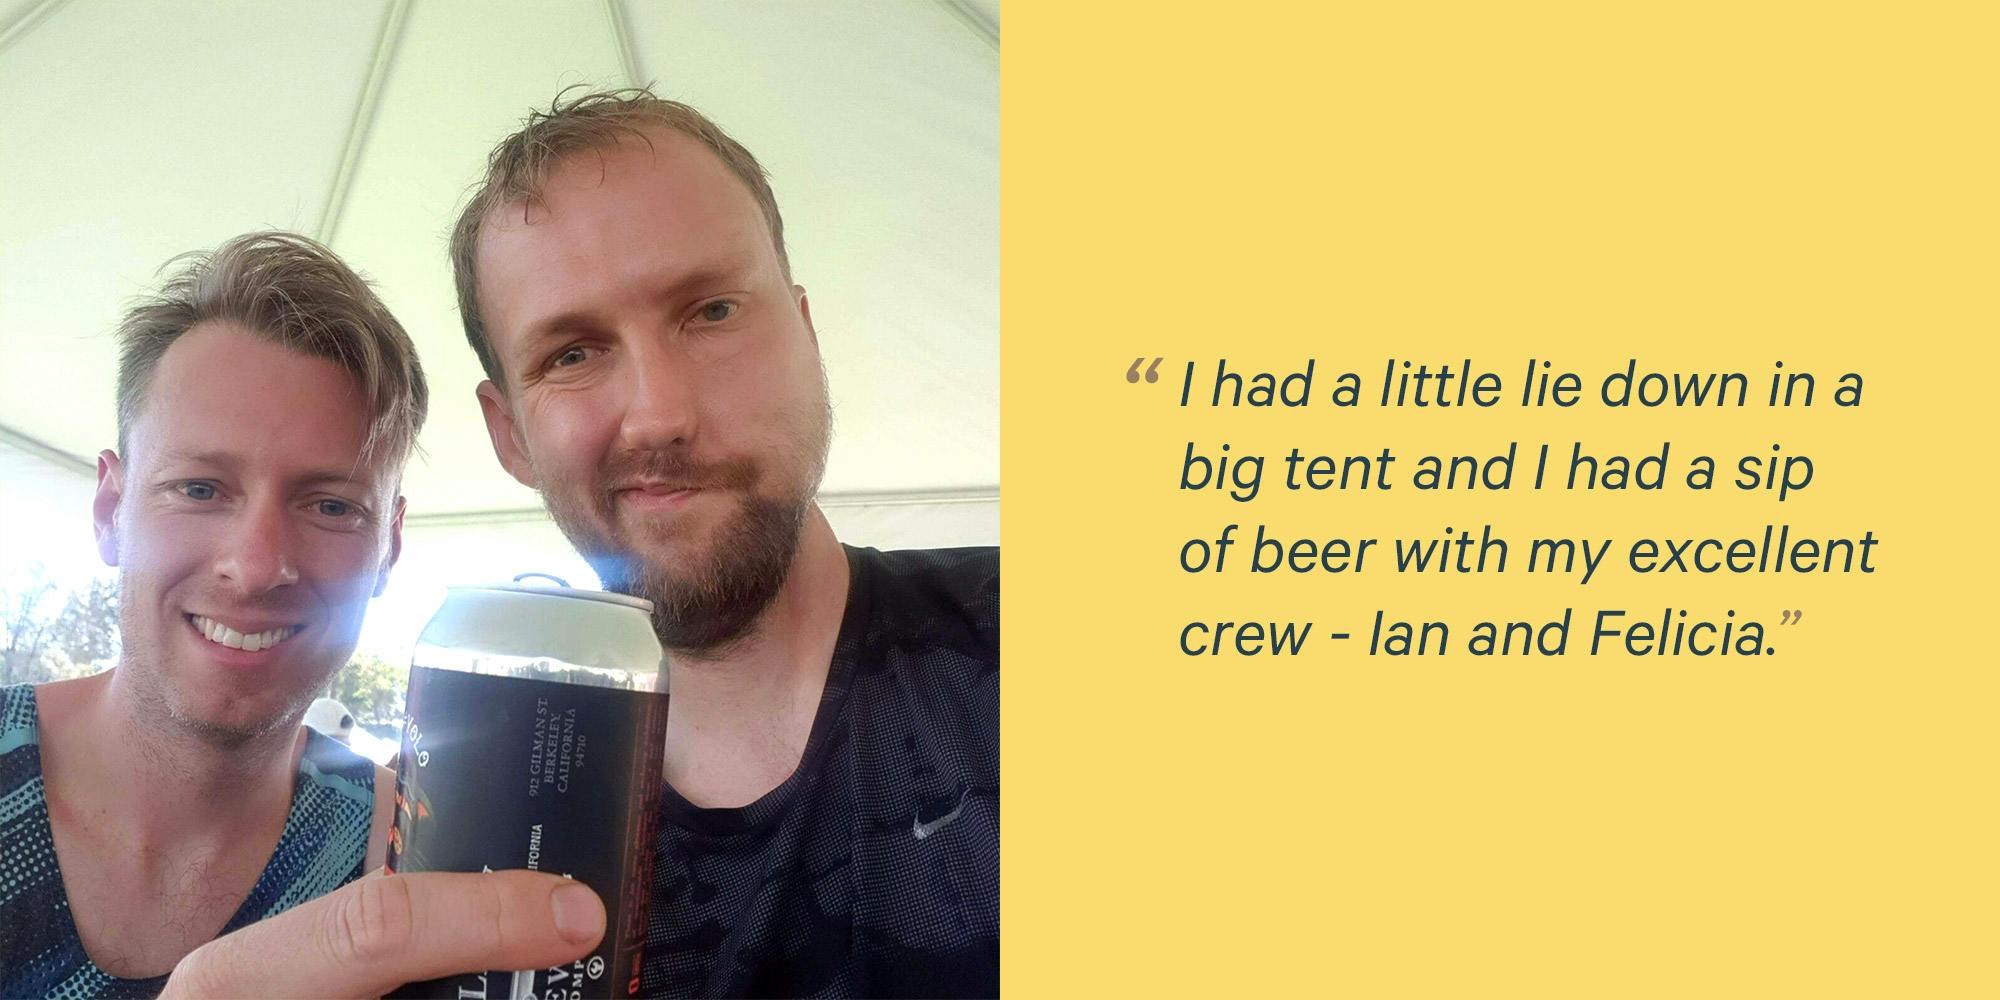 I had a little lie down in a big tent and I had a sip of beer with my excellent crew - Ian and Felicia. 